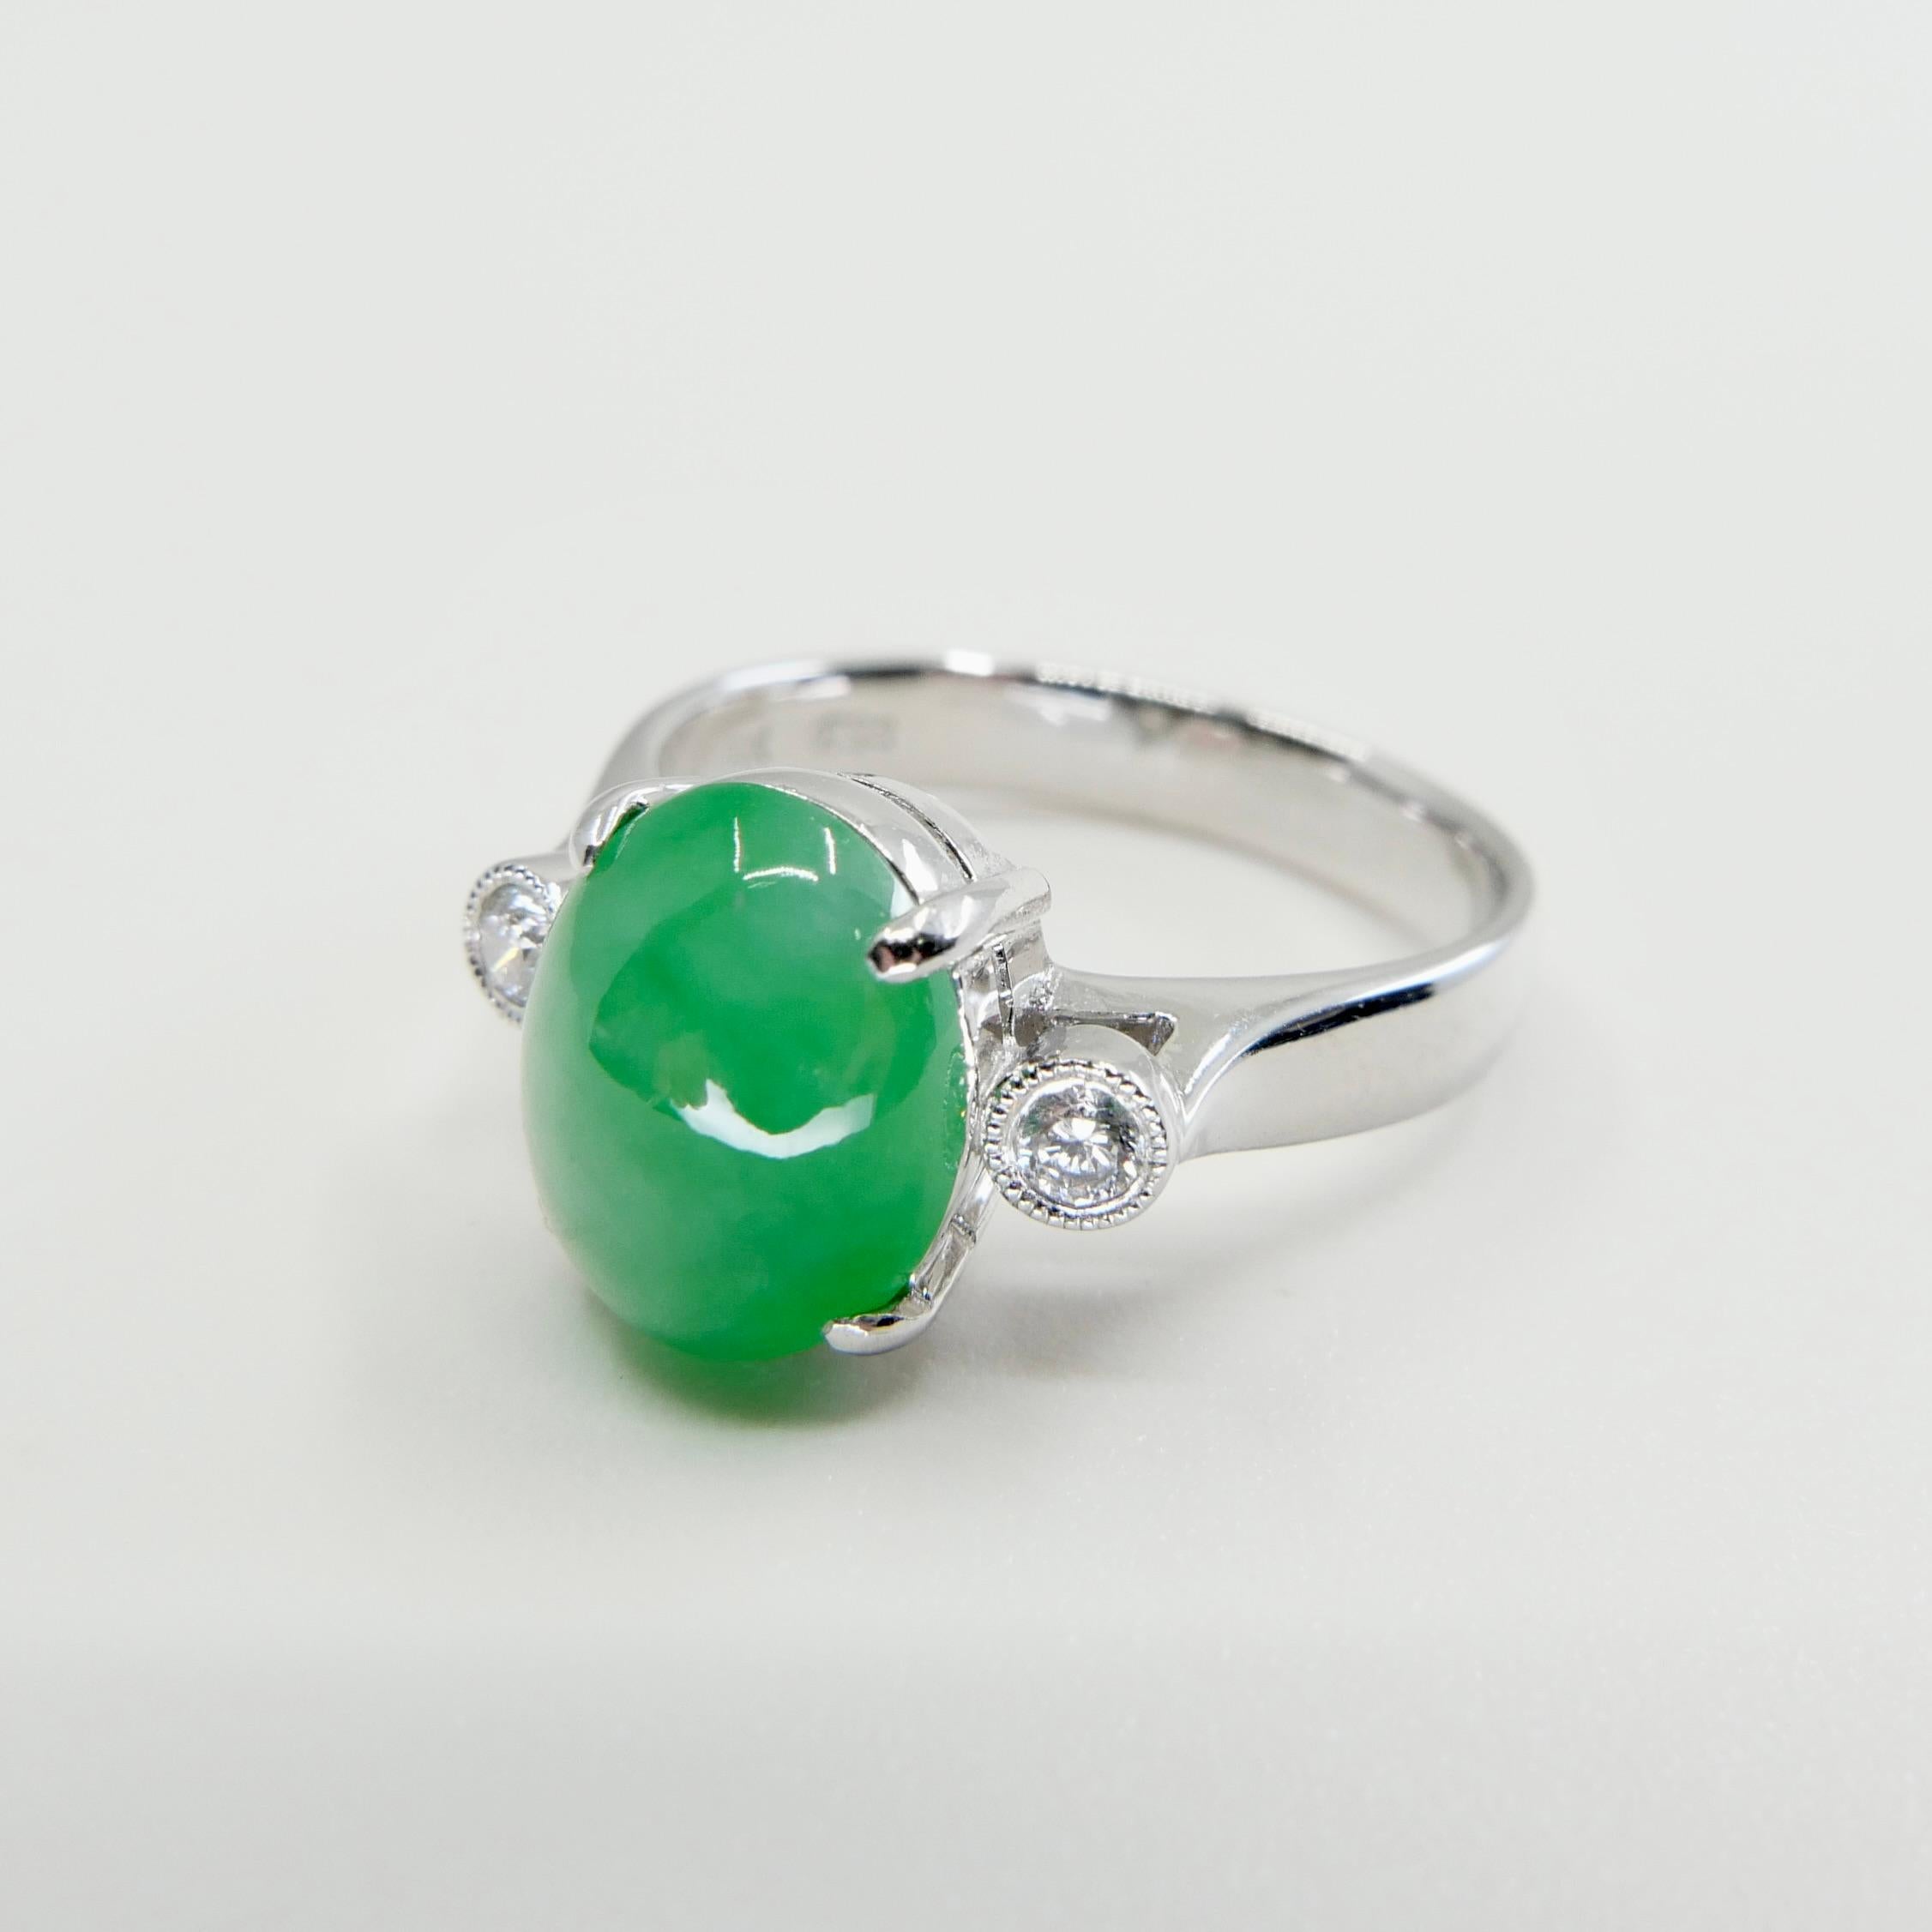 Certified Type a Jade & Oval Diamond 3 Stone Ring, Glowing Apple Green Color For Sale 10